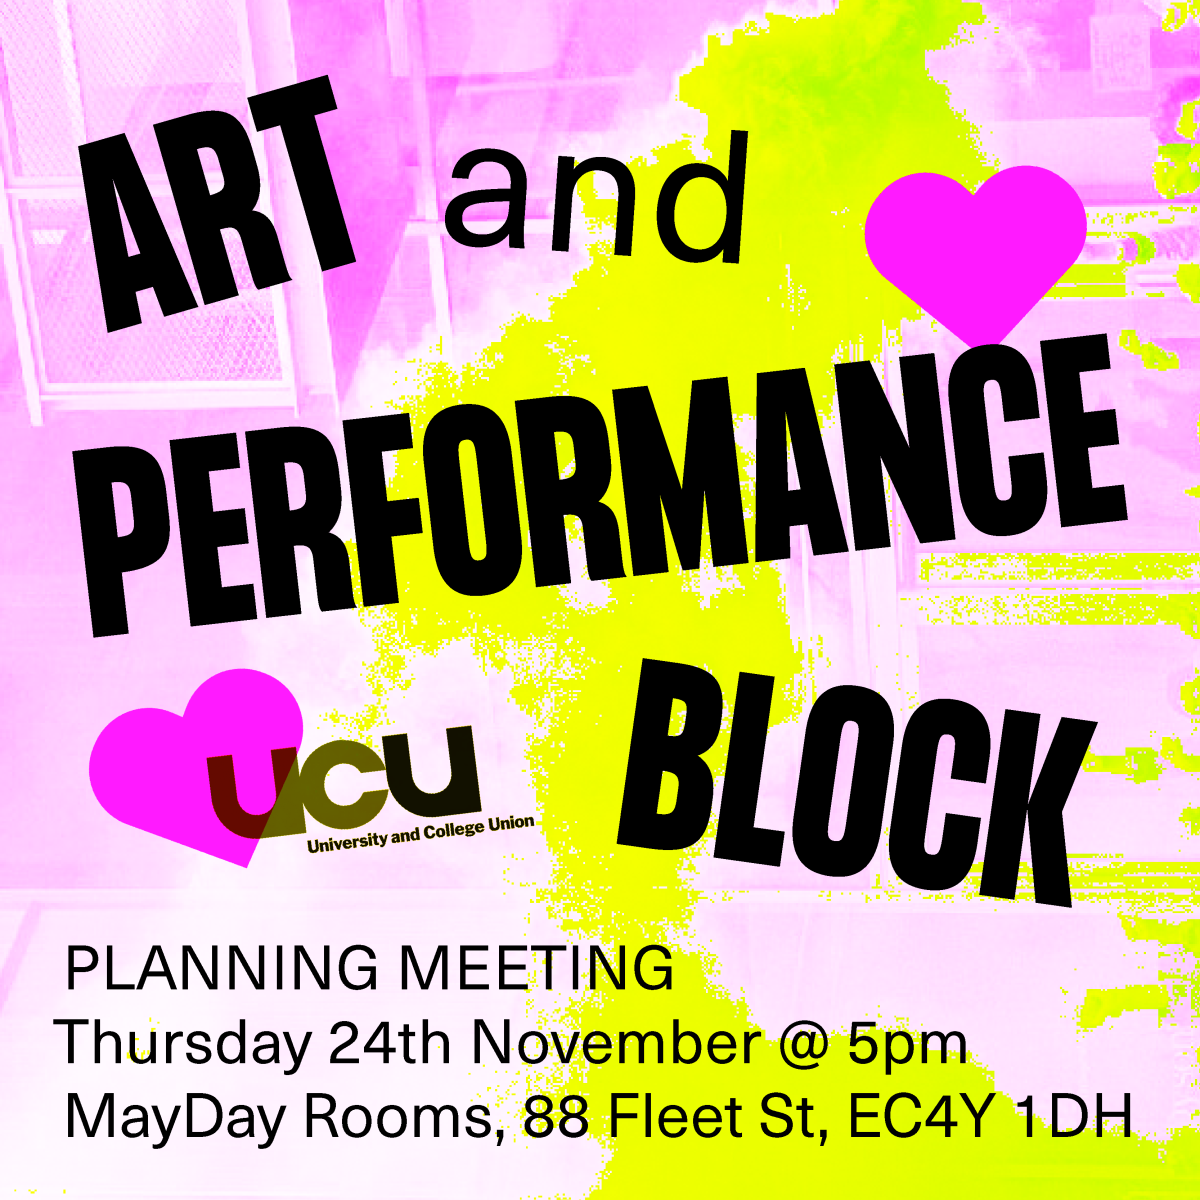 Art and Performance Block Planning Meeting